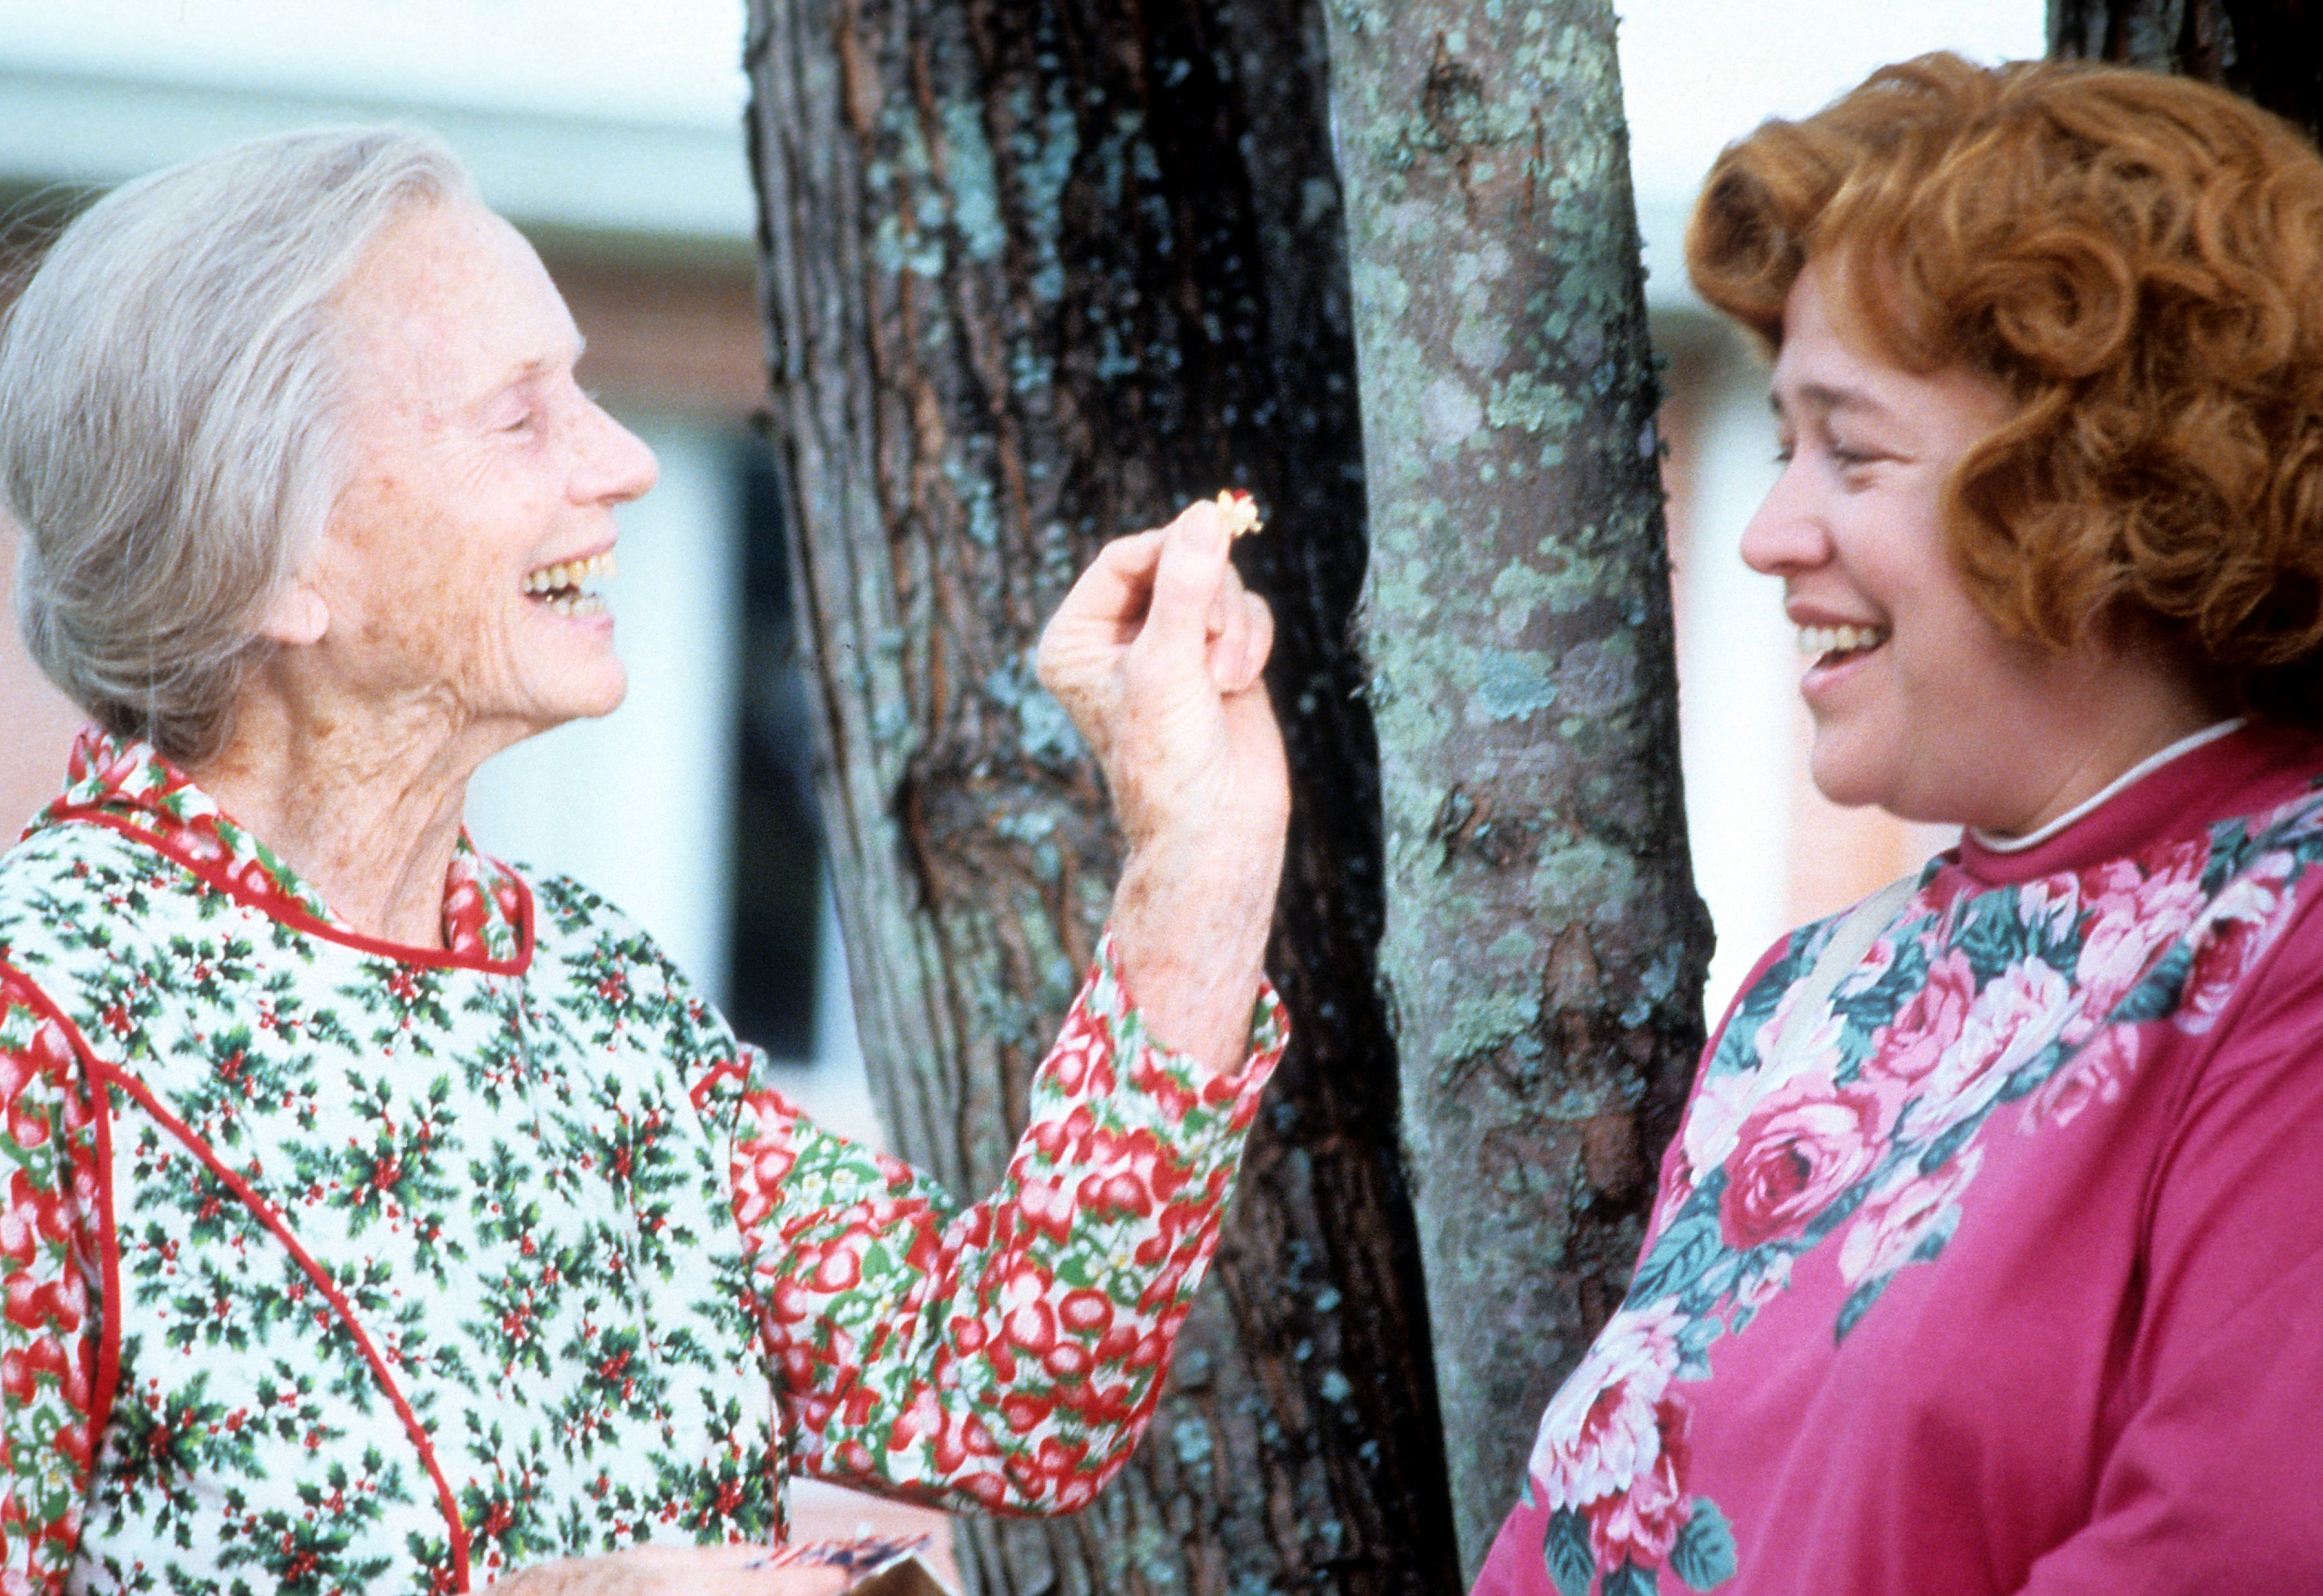 Jessica Tandy laughing with Kathy Bates in a scene from the film 'Fried Green Tomatoes', 1991 | Source: Getty Images